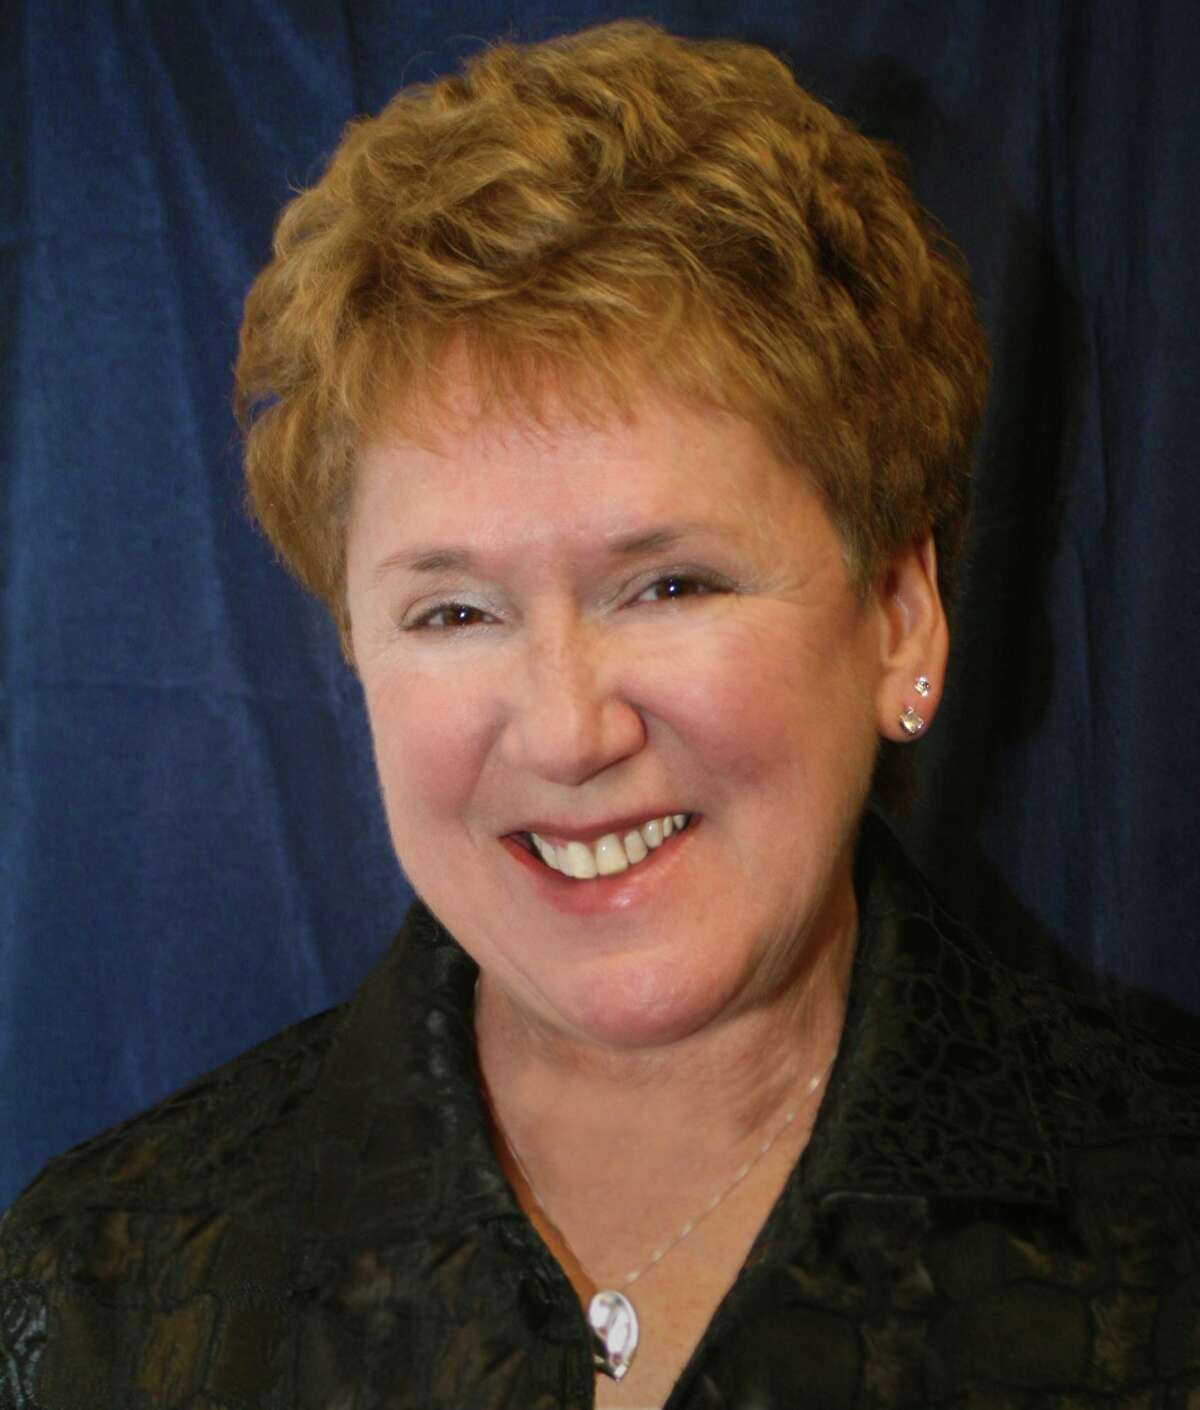 JoAnn Ryan, president and CEO of the NW CT Chamber of Commerce